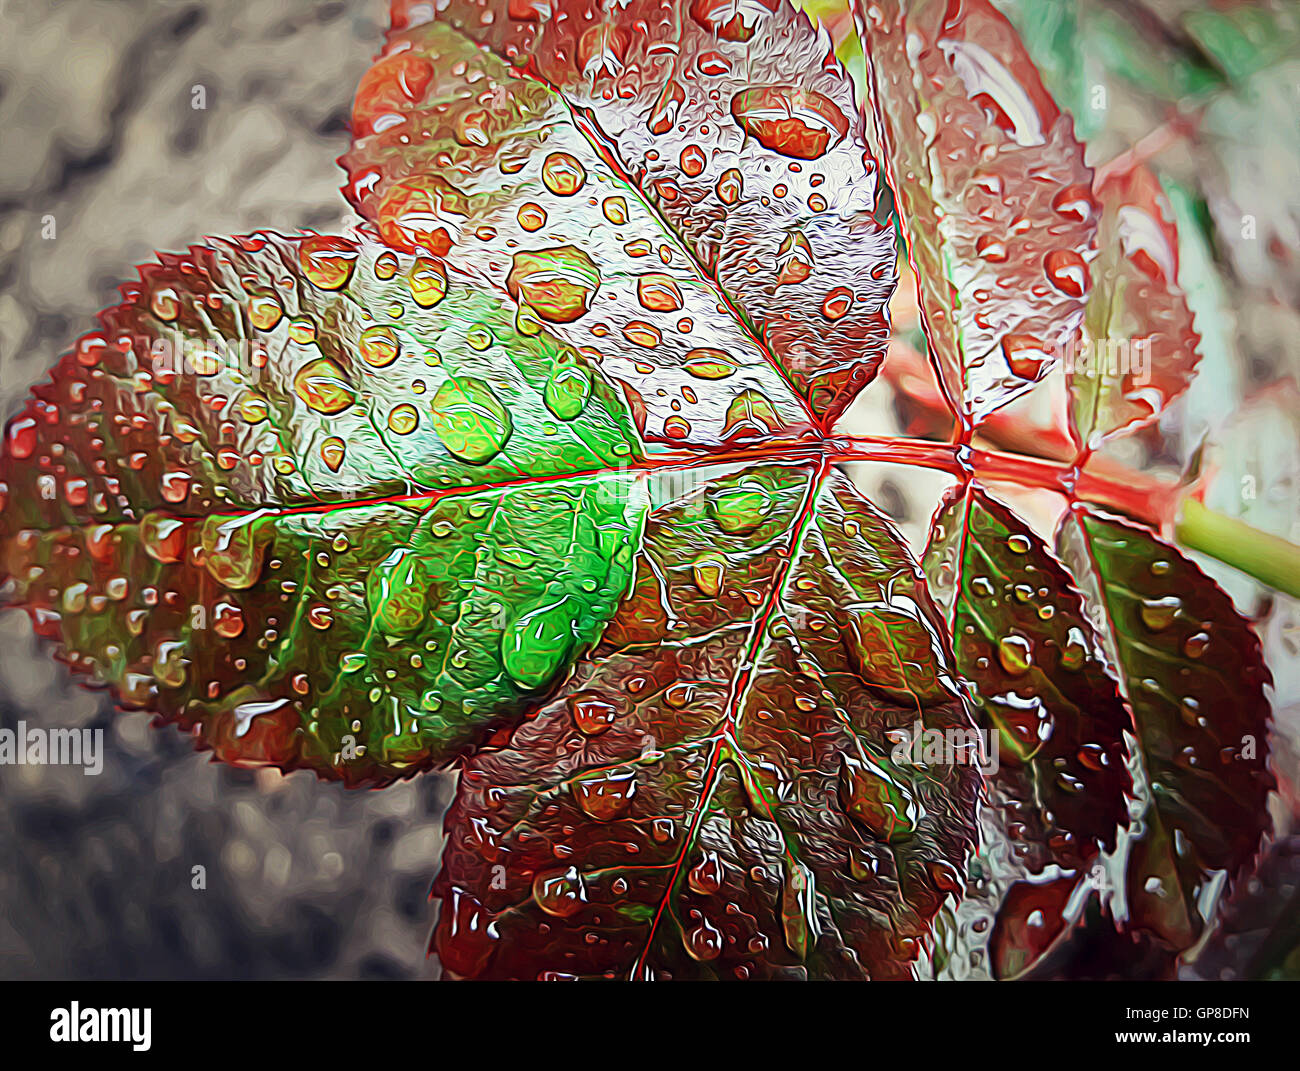 Illustration closeup of rose leaves with water droplets Stock Photo